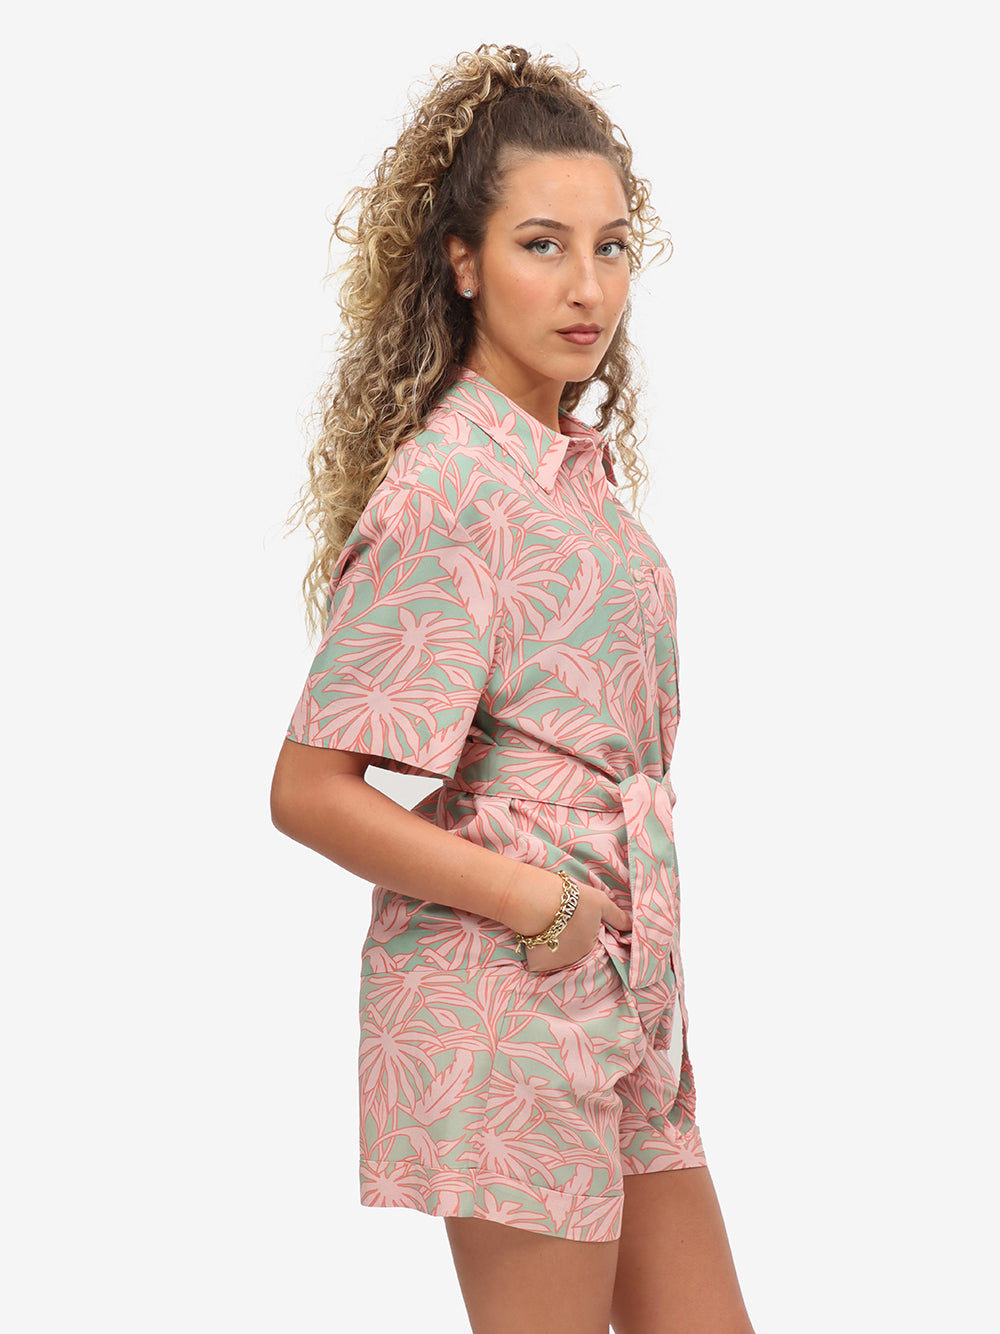 Woolrich Camicia Donna Printed Fluid-Coral Sand Flower